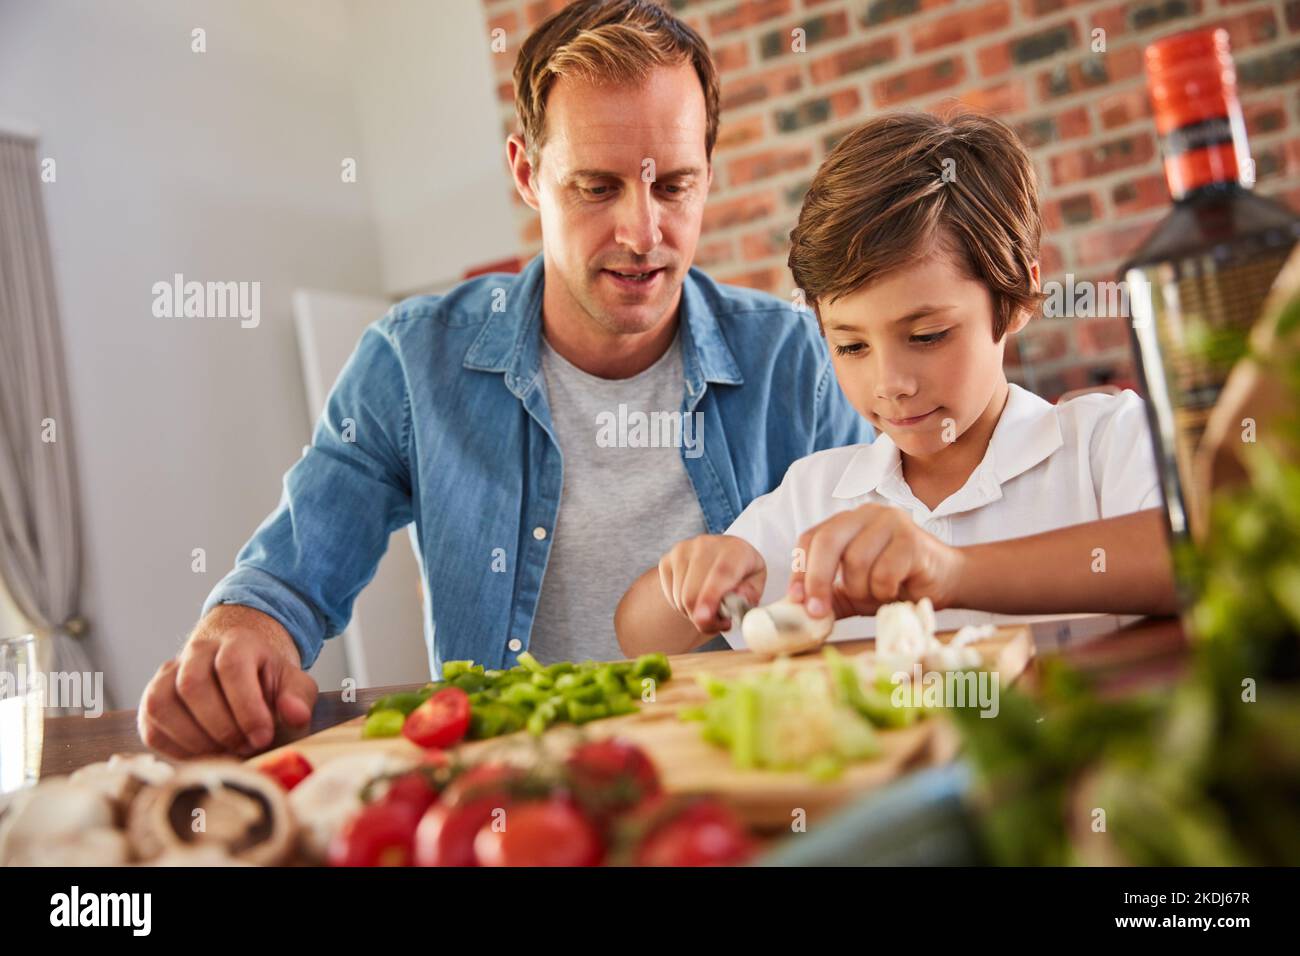 Teaching dad a thing or two in the kitchen. a father watching his little boy chop vegetables in the kitchen. Stock Photo